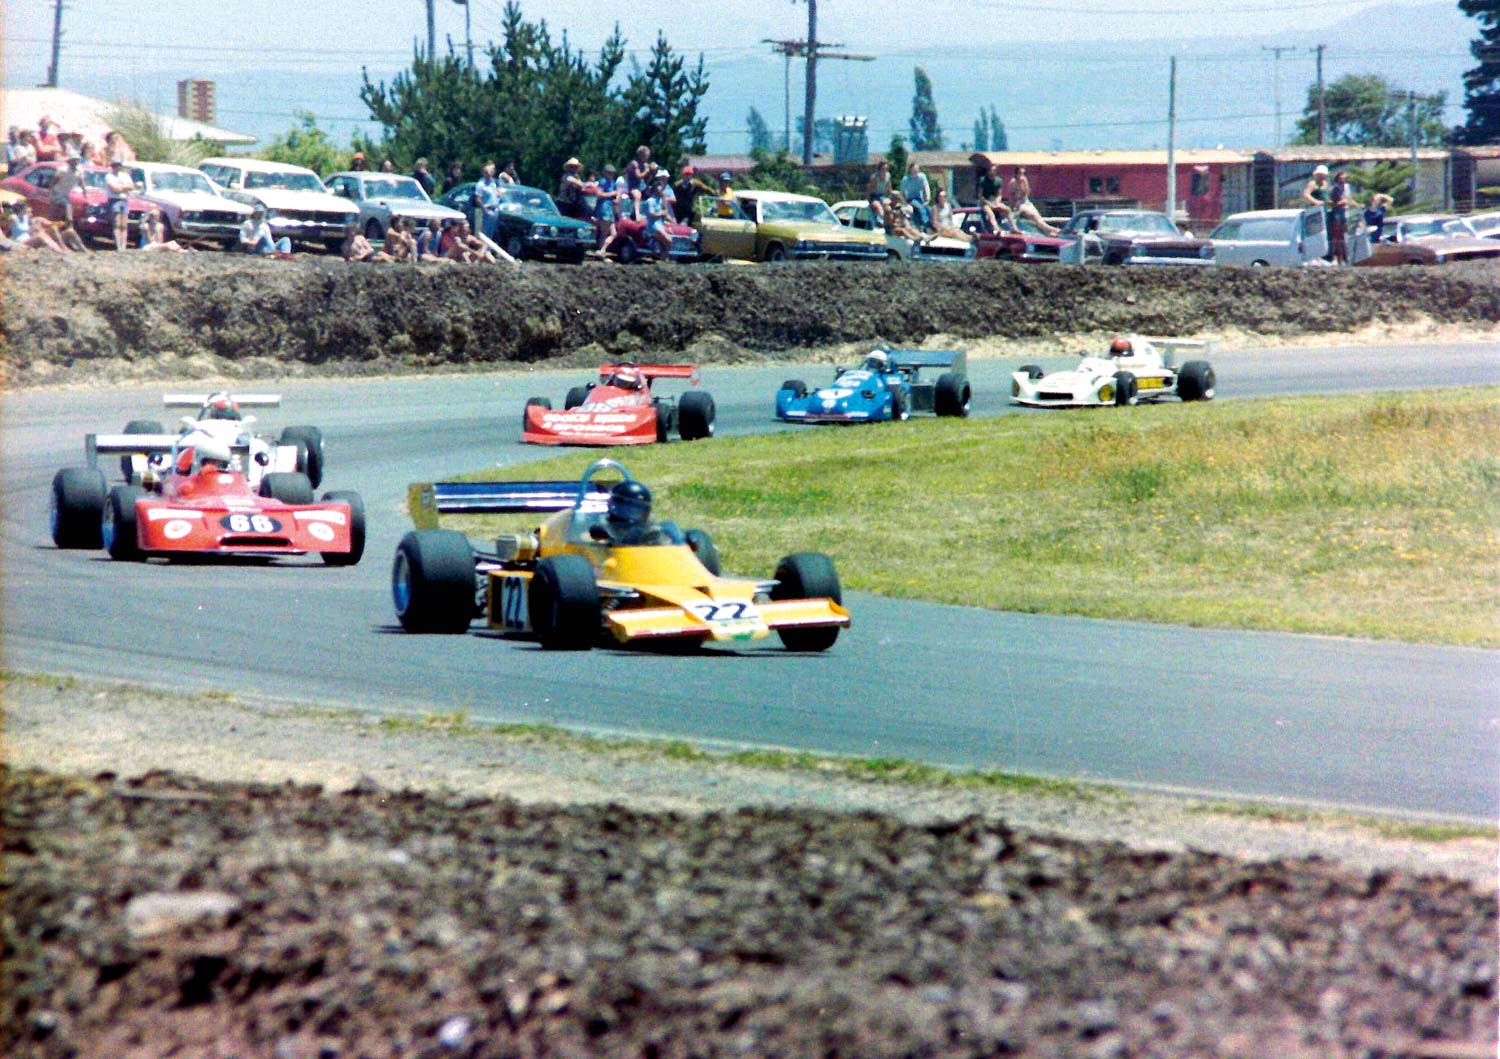 Ross Stone (of Stone Brothers Racing V8 Supercars fame) leads a group of Formula Atlantic cars in the Cuda JR3 he and brother Jim built